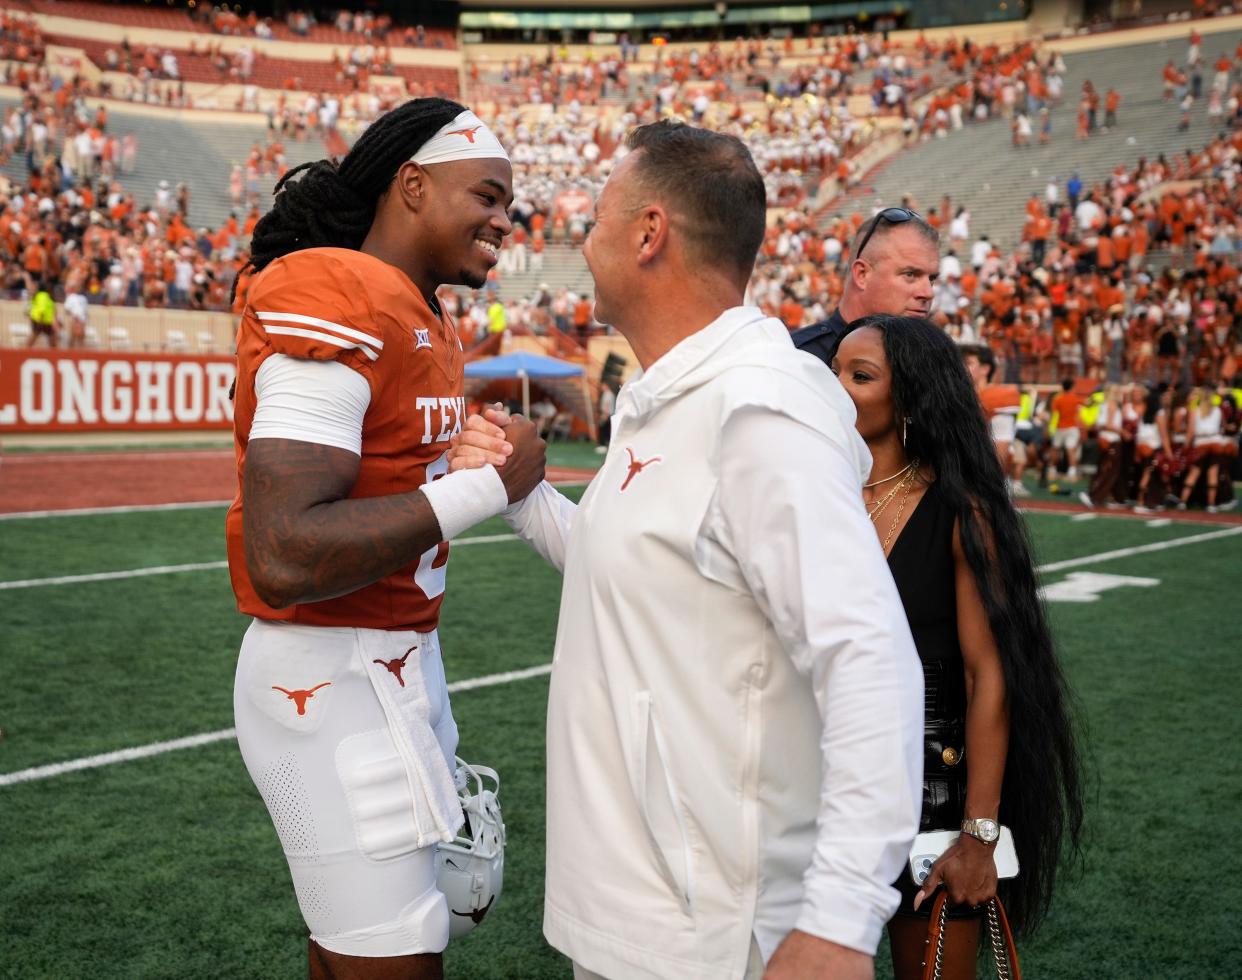 Texas head coach Steve Sarkisian congratulates quarterback Maalik Murphy after the Oct. 28 win over Kansas State. This has been a big month for both: Sarkisian signed an impressive recruiting haul that's the nation's No. 3 class heading into national signing day and Murphy has transferred to Duke, where he'll probably start.